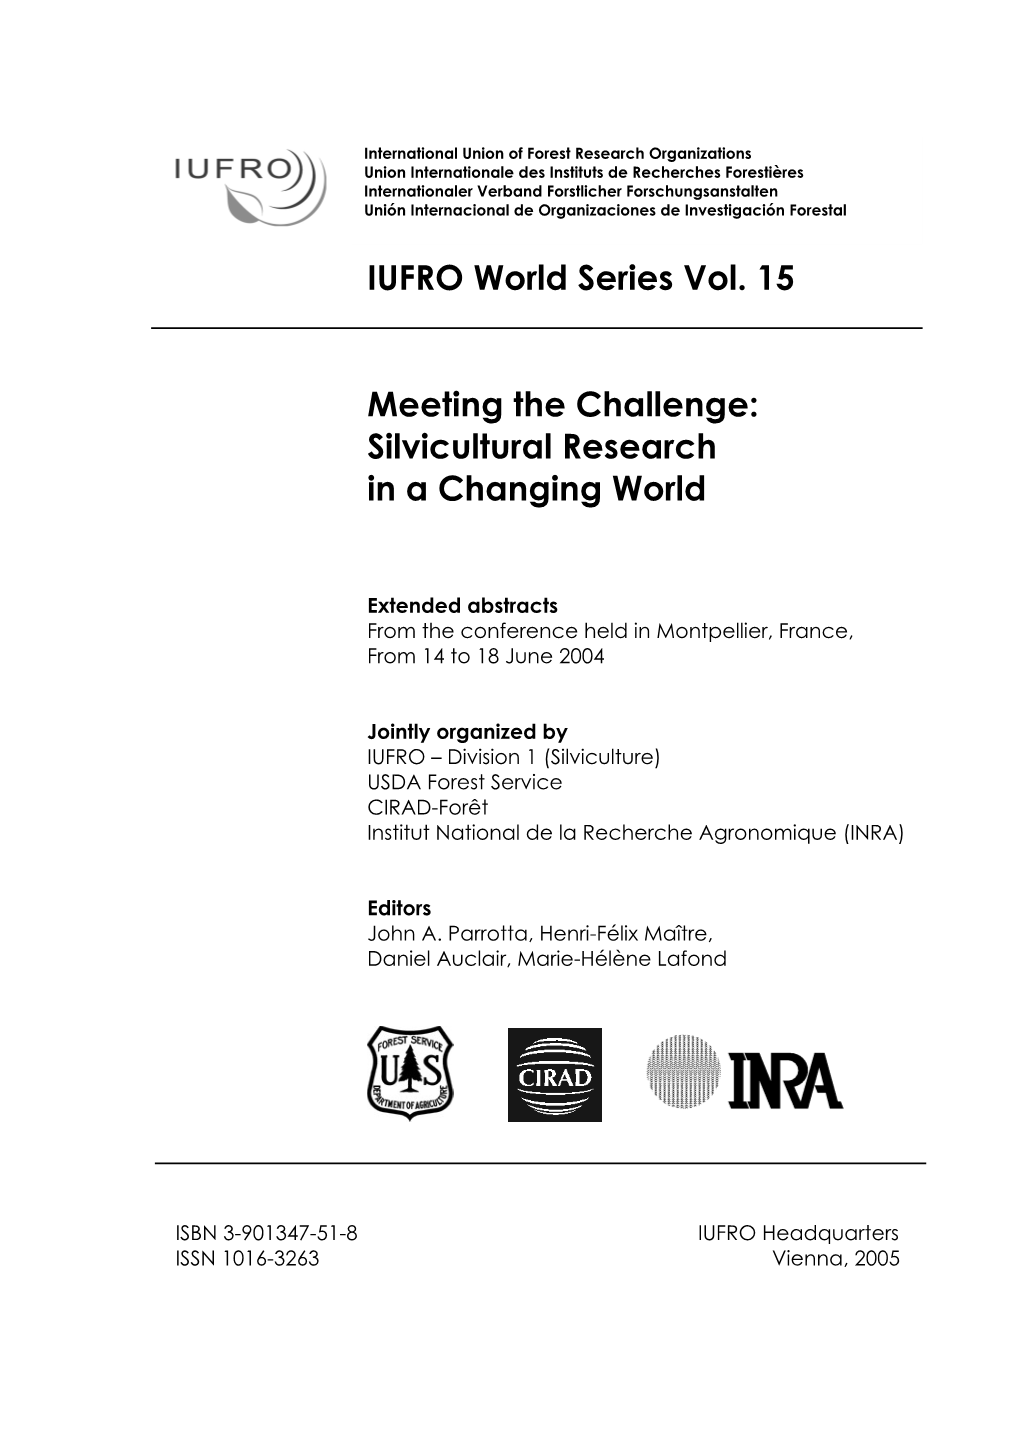 IUFRO World Series Vol. 15 Meeting the Challenge: Silvicultural